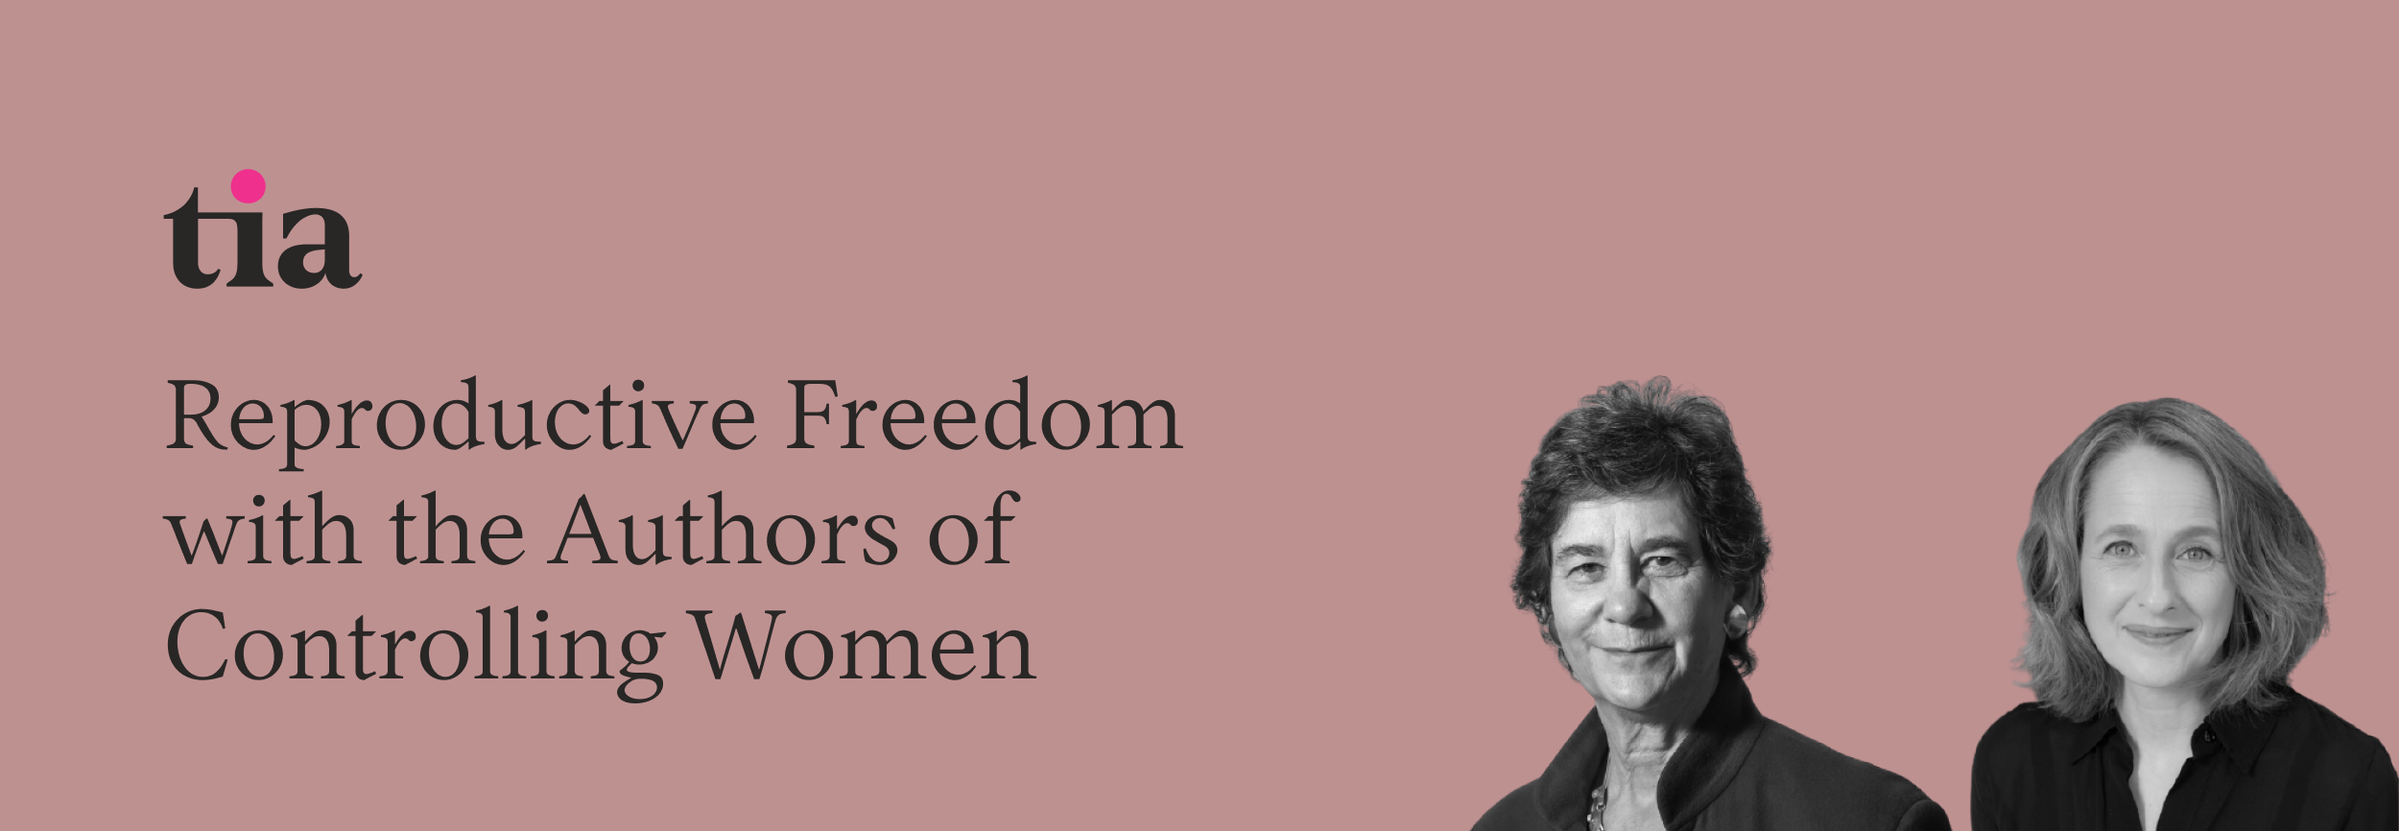 Tia Presents: Reproductive Freedom with the Authors of Controlling Women 